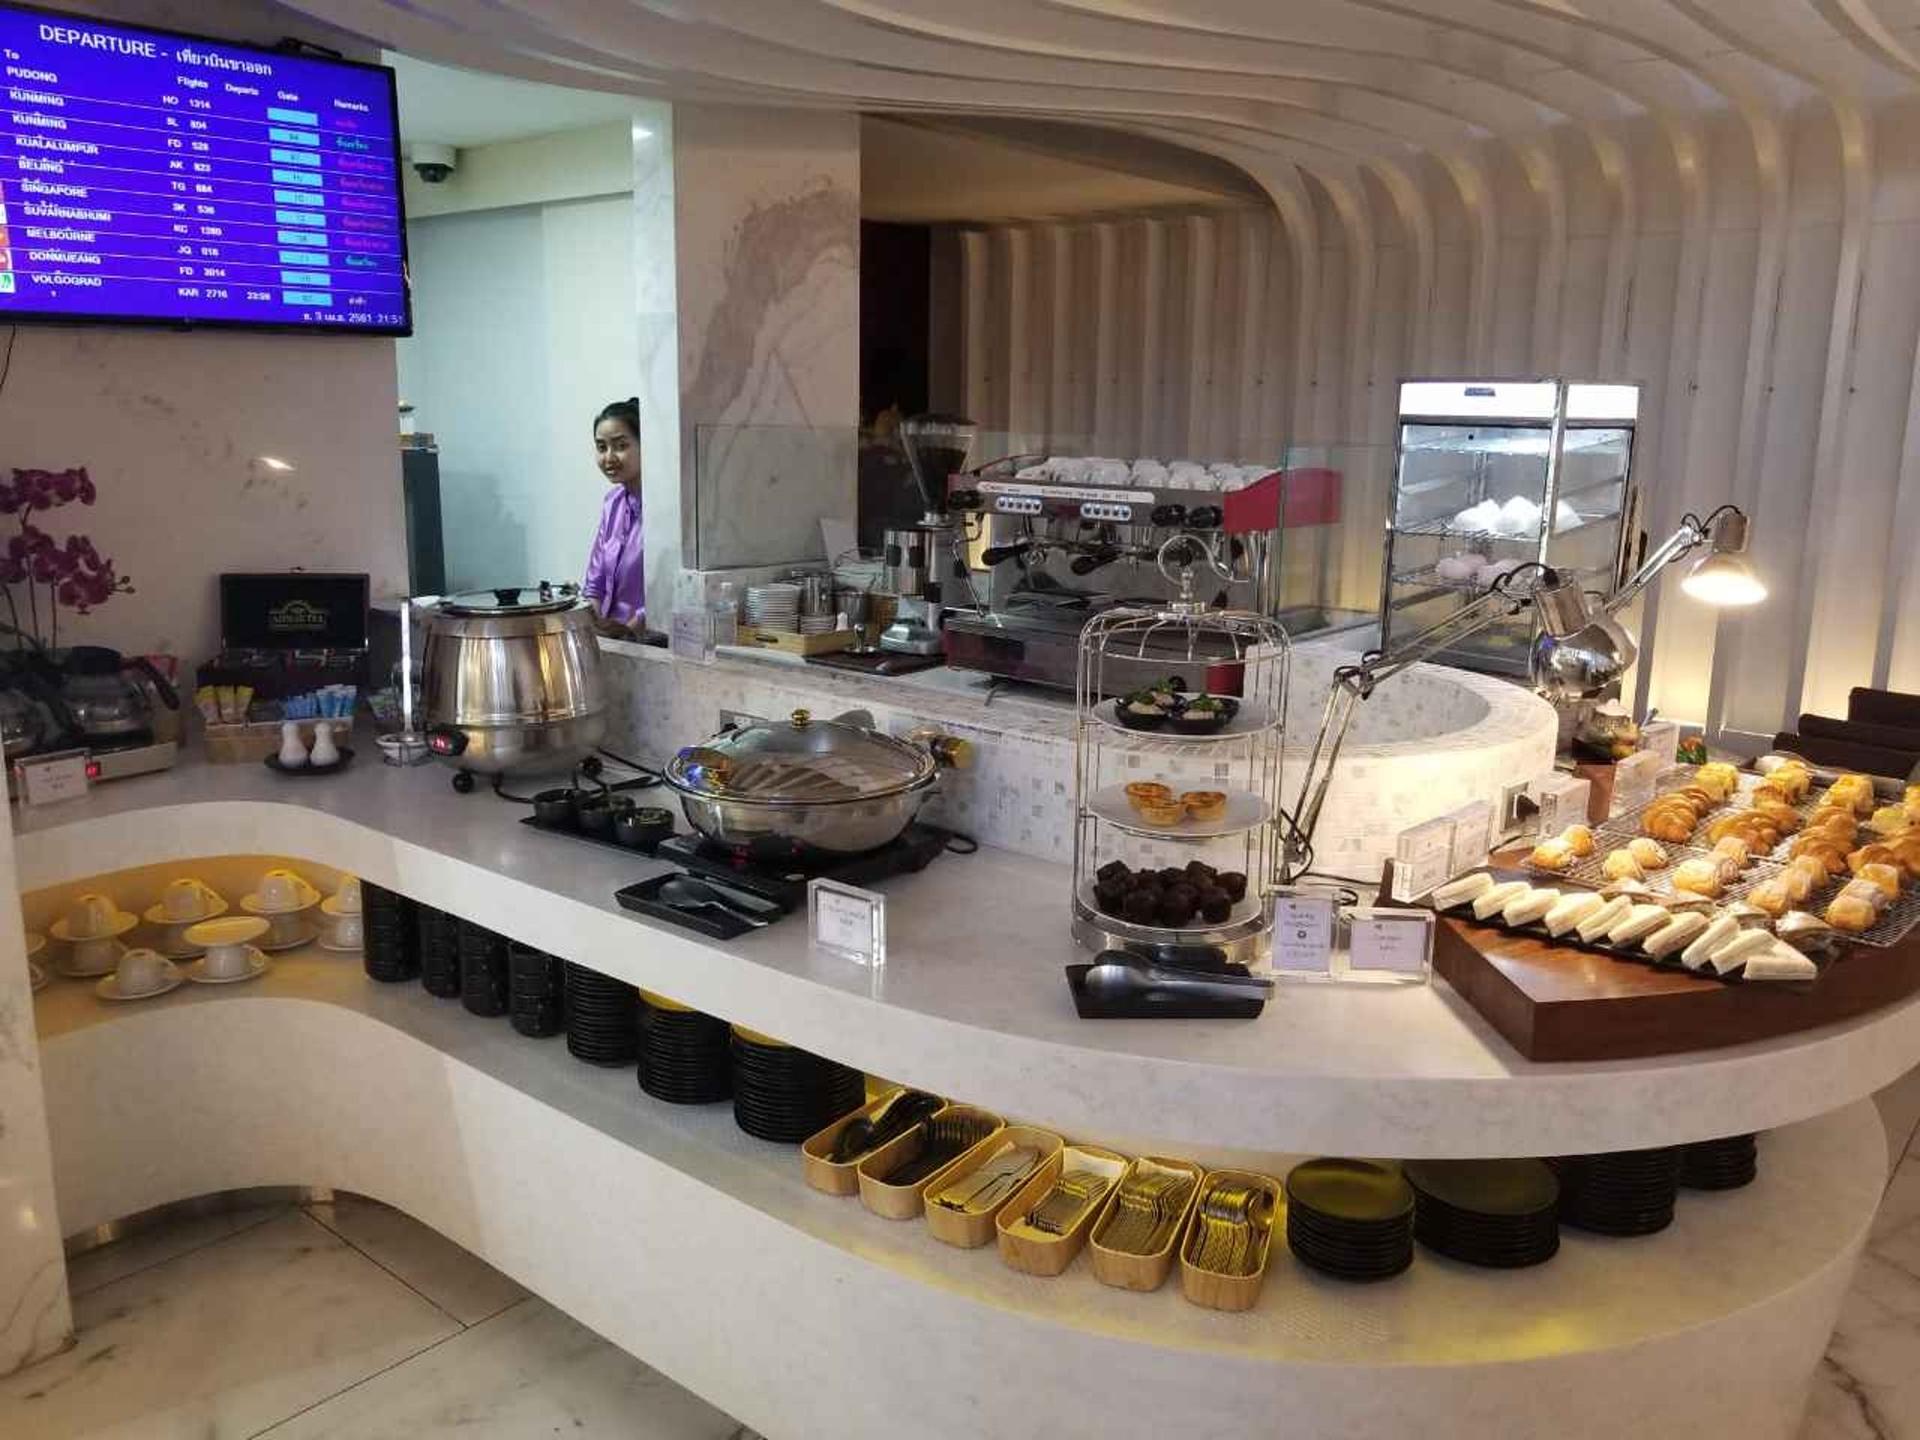 Thai Airways Royal Orchid Lounge image 7 of 9